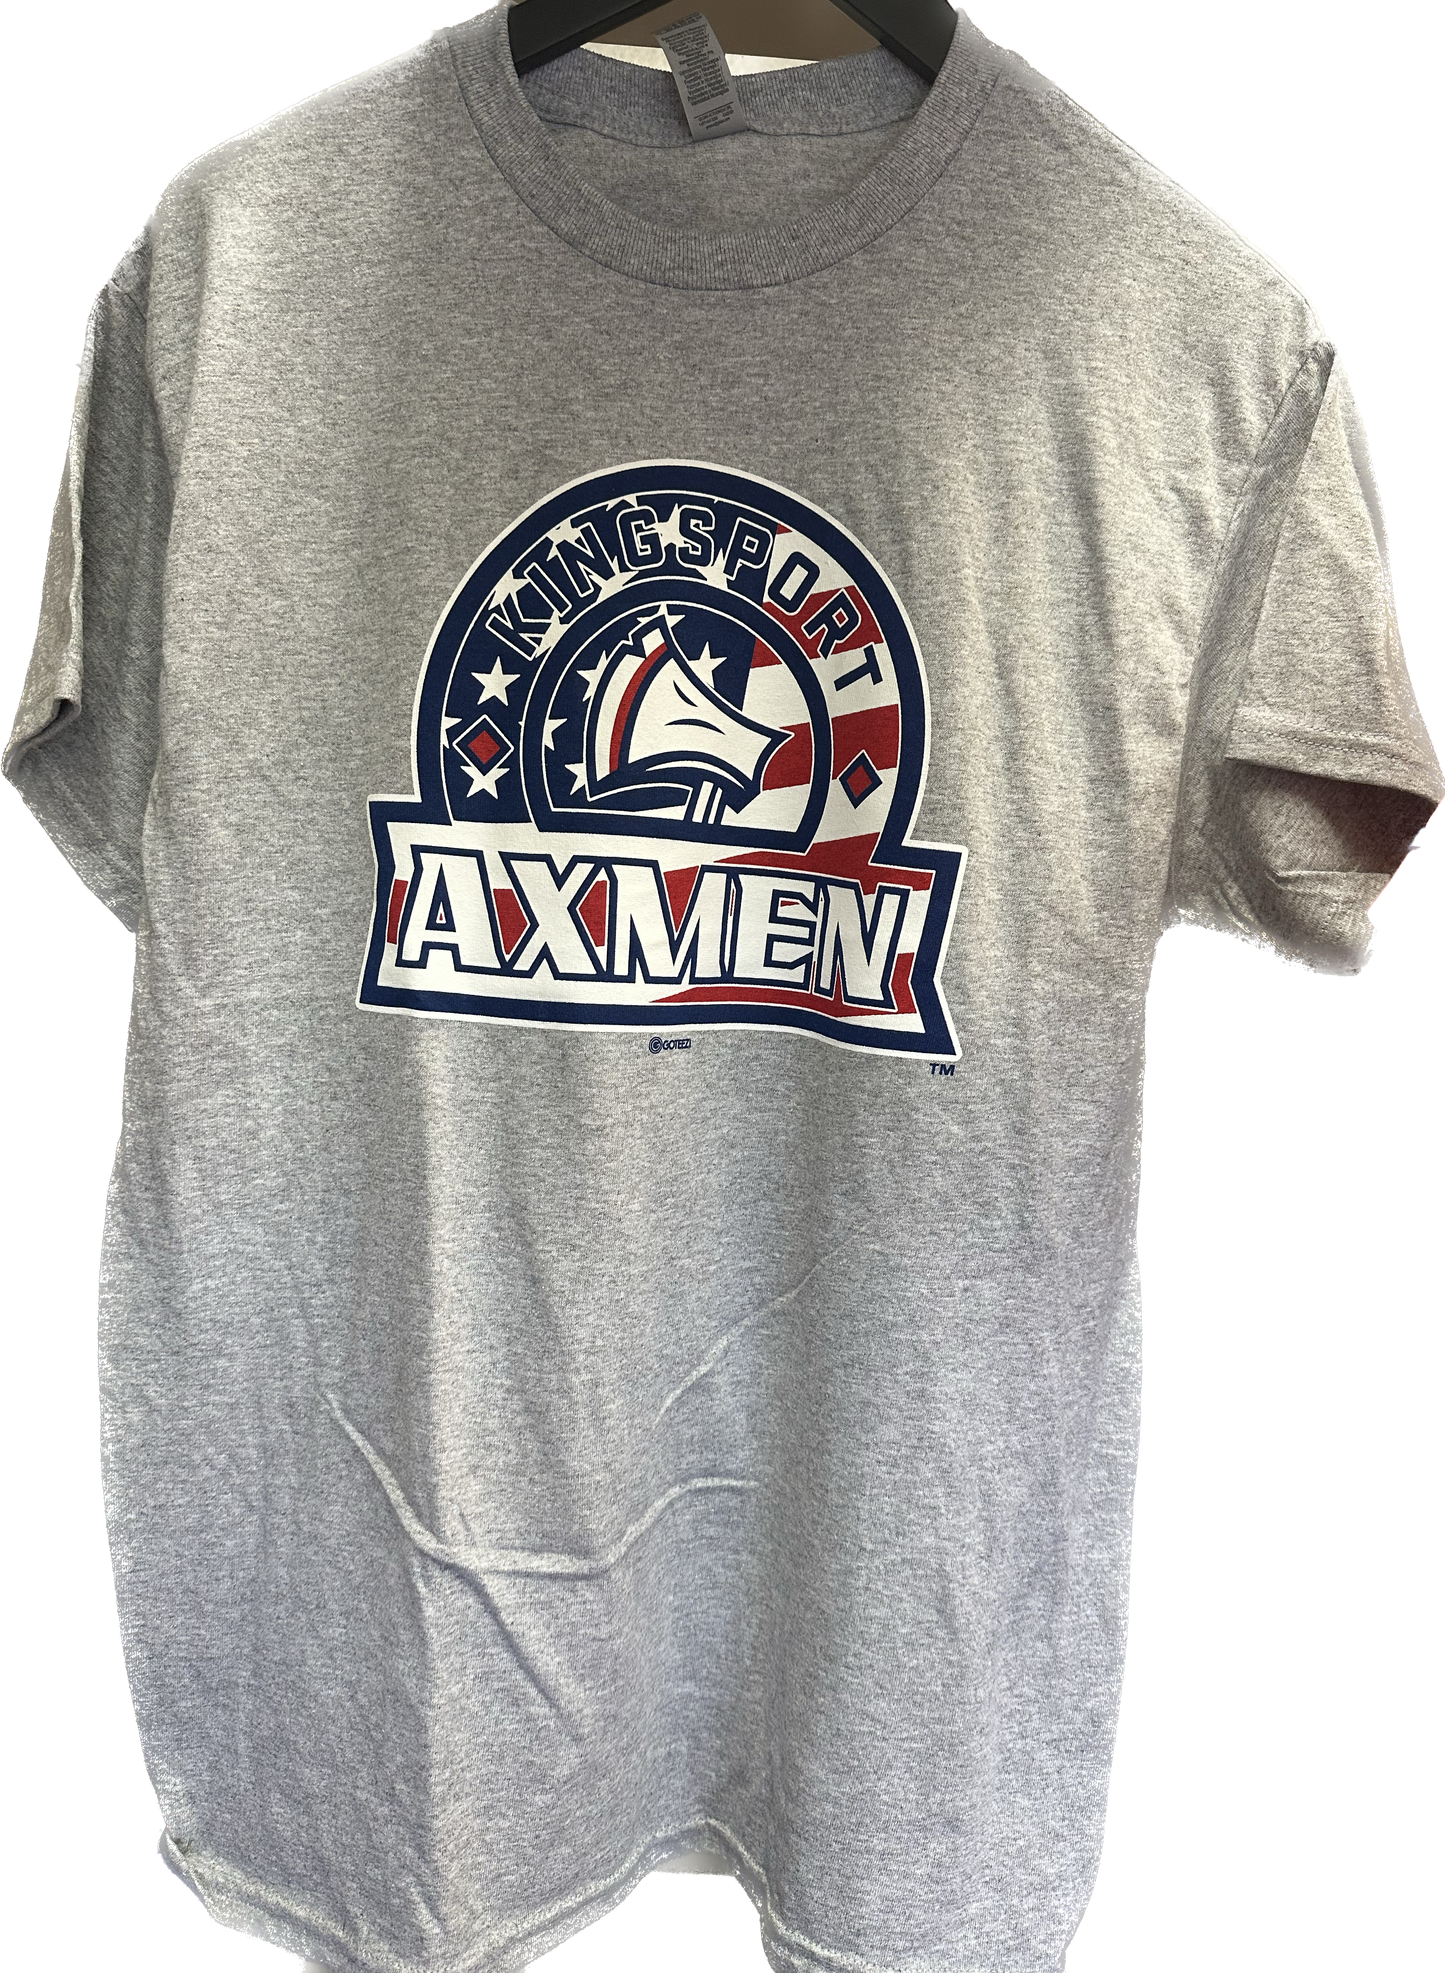 Kingsport Axmen Red, White and Blue Tee